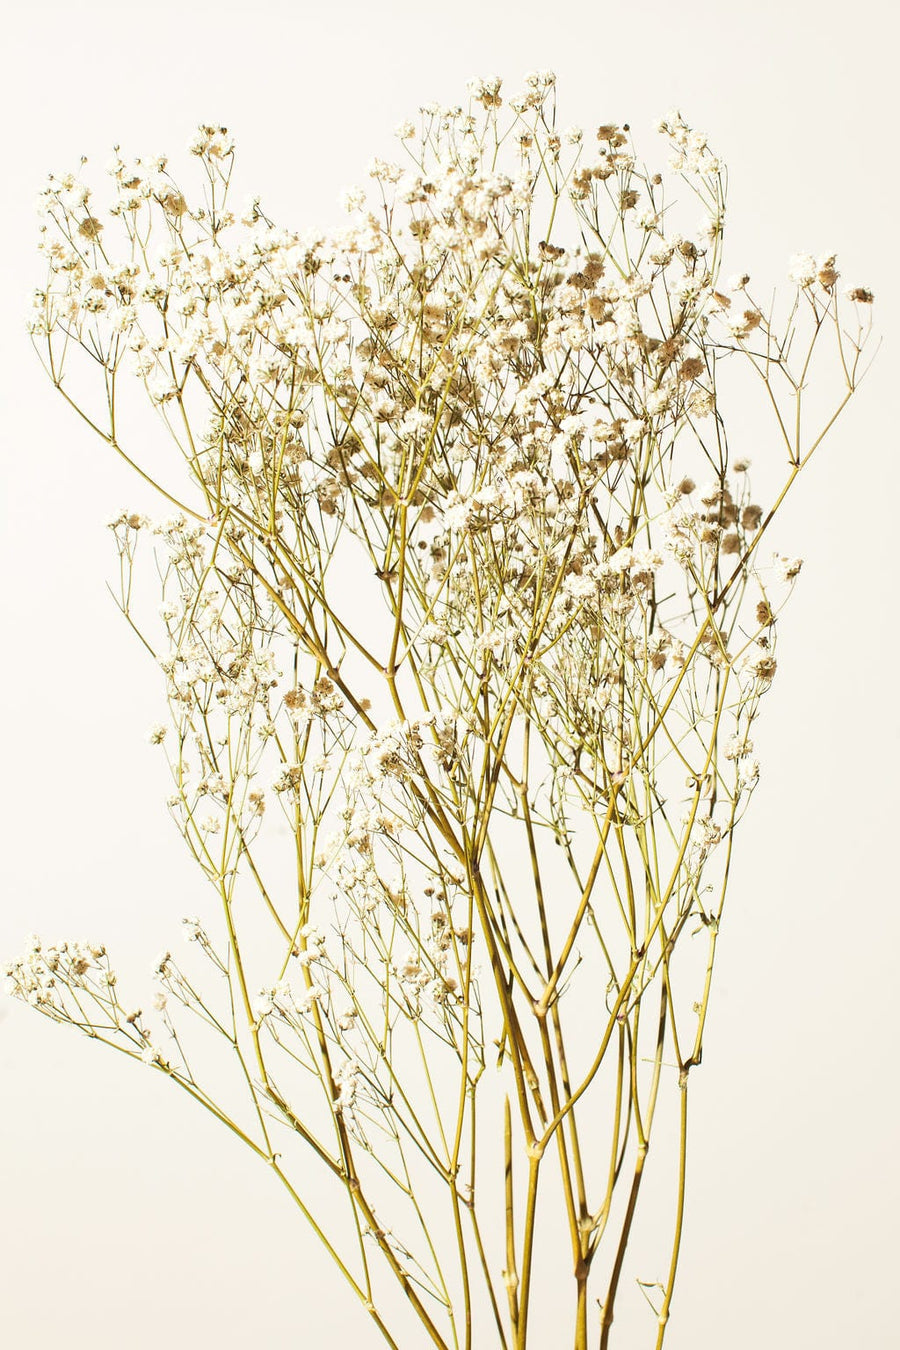 Idlewild Floral Co. Bunches Natural White Baby's Breath